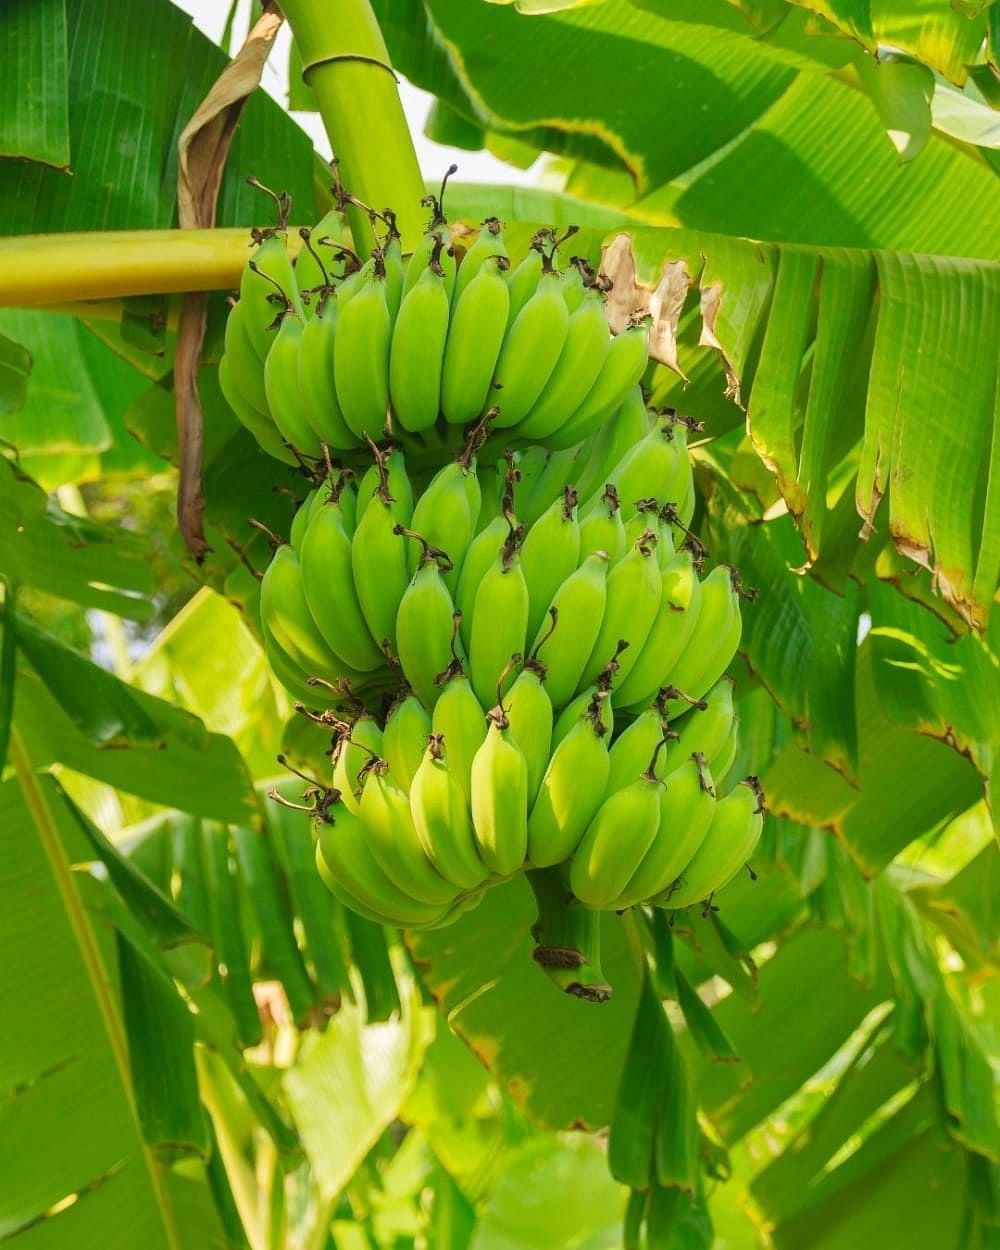 Raw Bananas 101: Benefits, Side Effects & More!